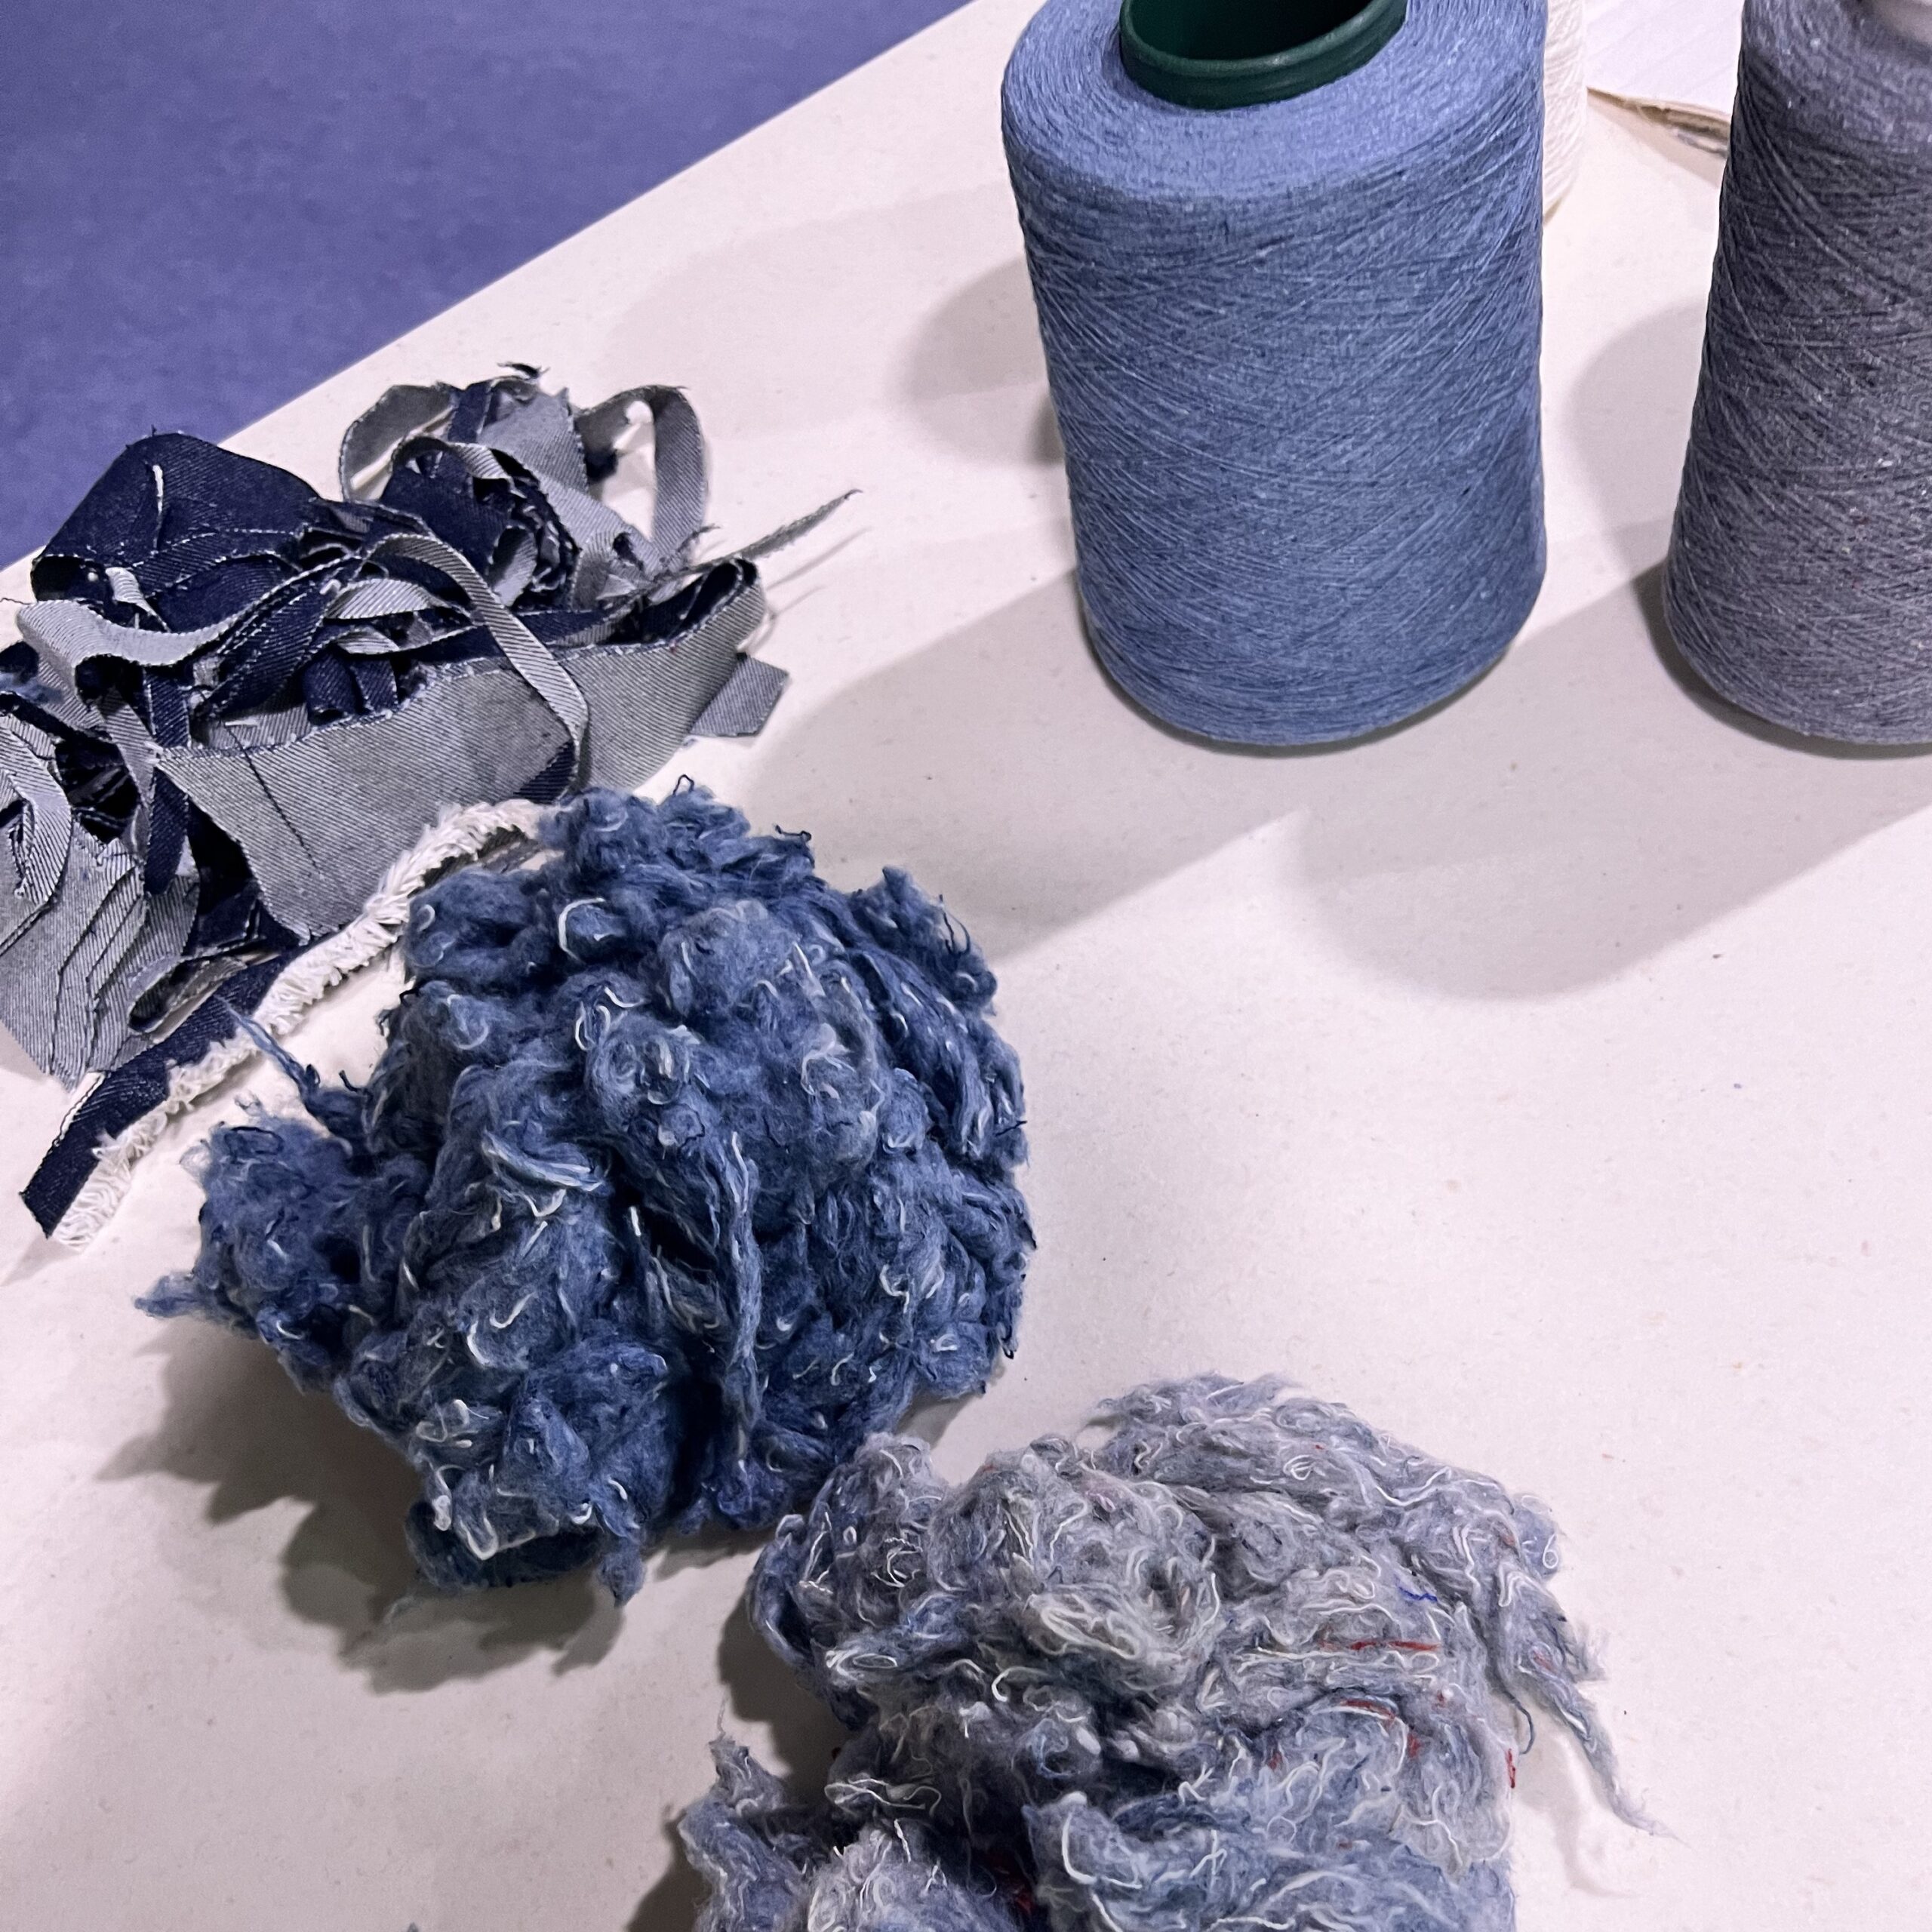 recycled denim in various stages - photo